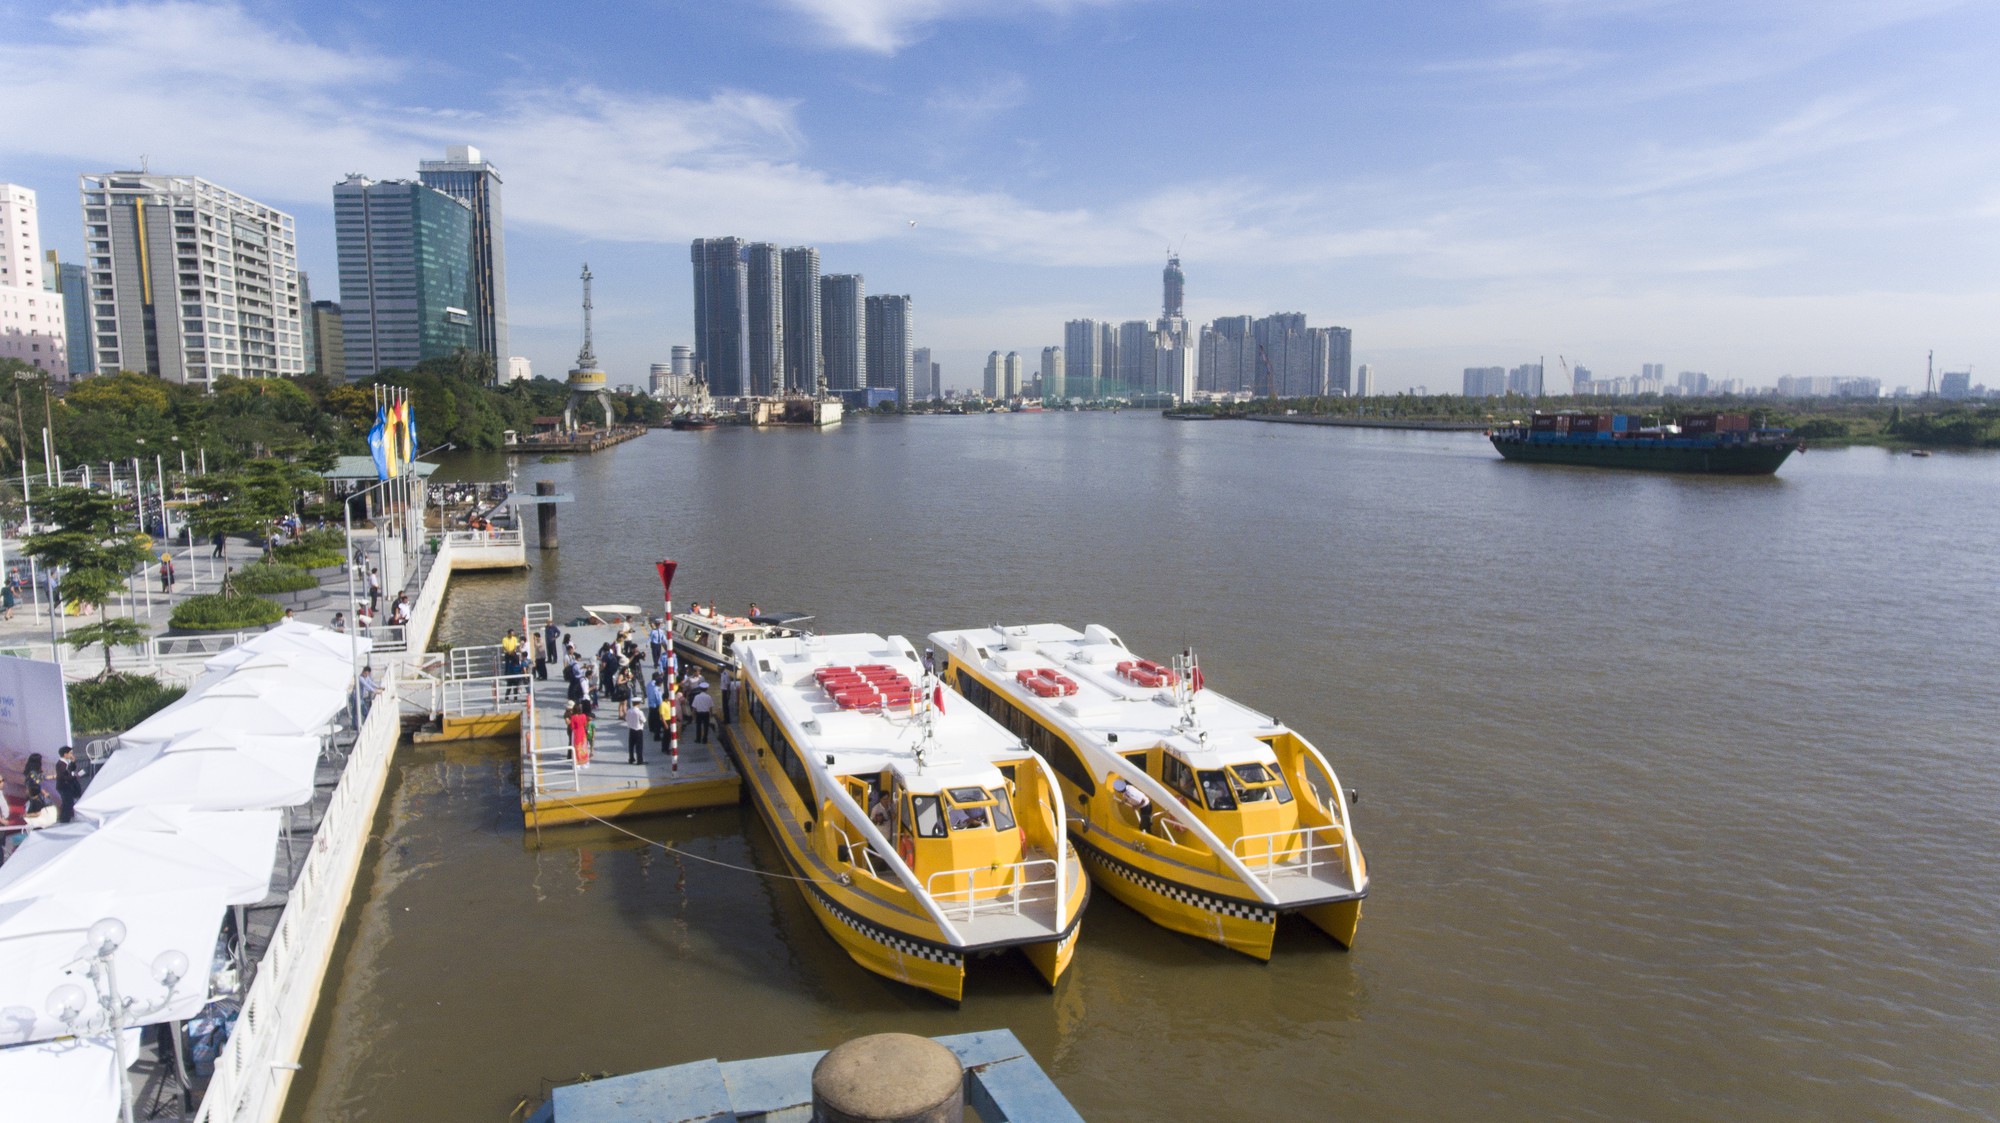 Two boats are ready for the operation of the river bus route No. 1 at Bach Dang Wharf in District 1, Ho Chi Minh City, on November 25, 2017. Photo: Tuoi Tre